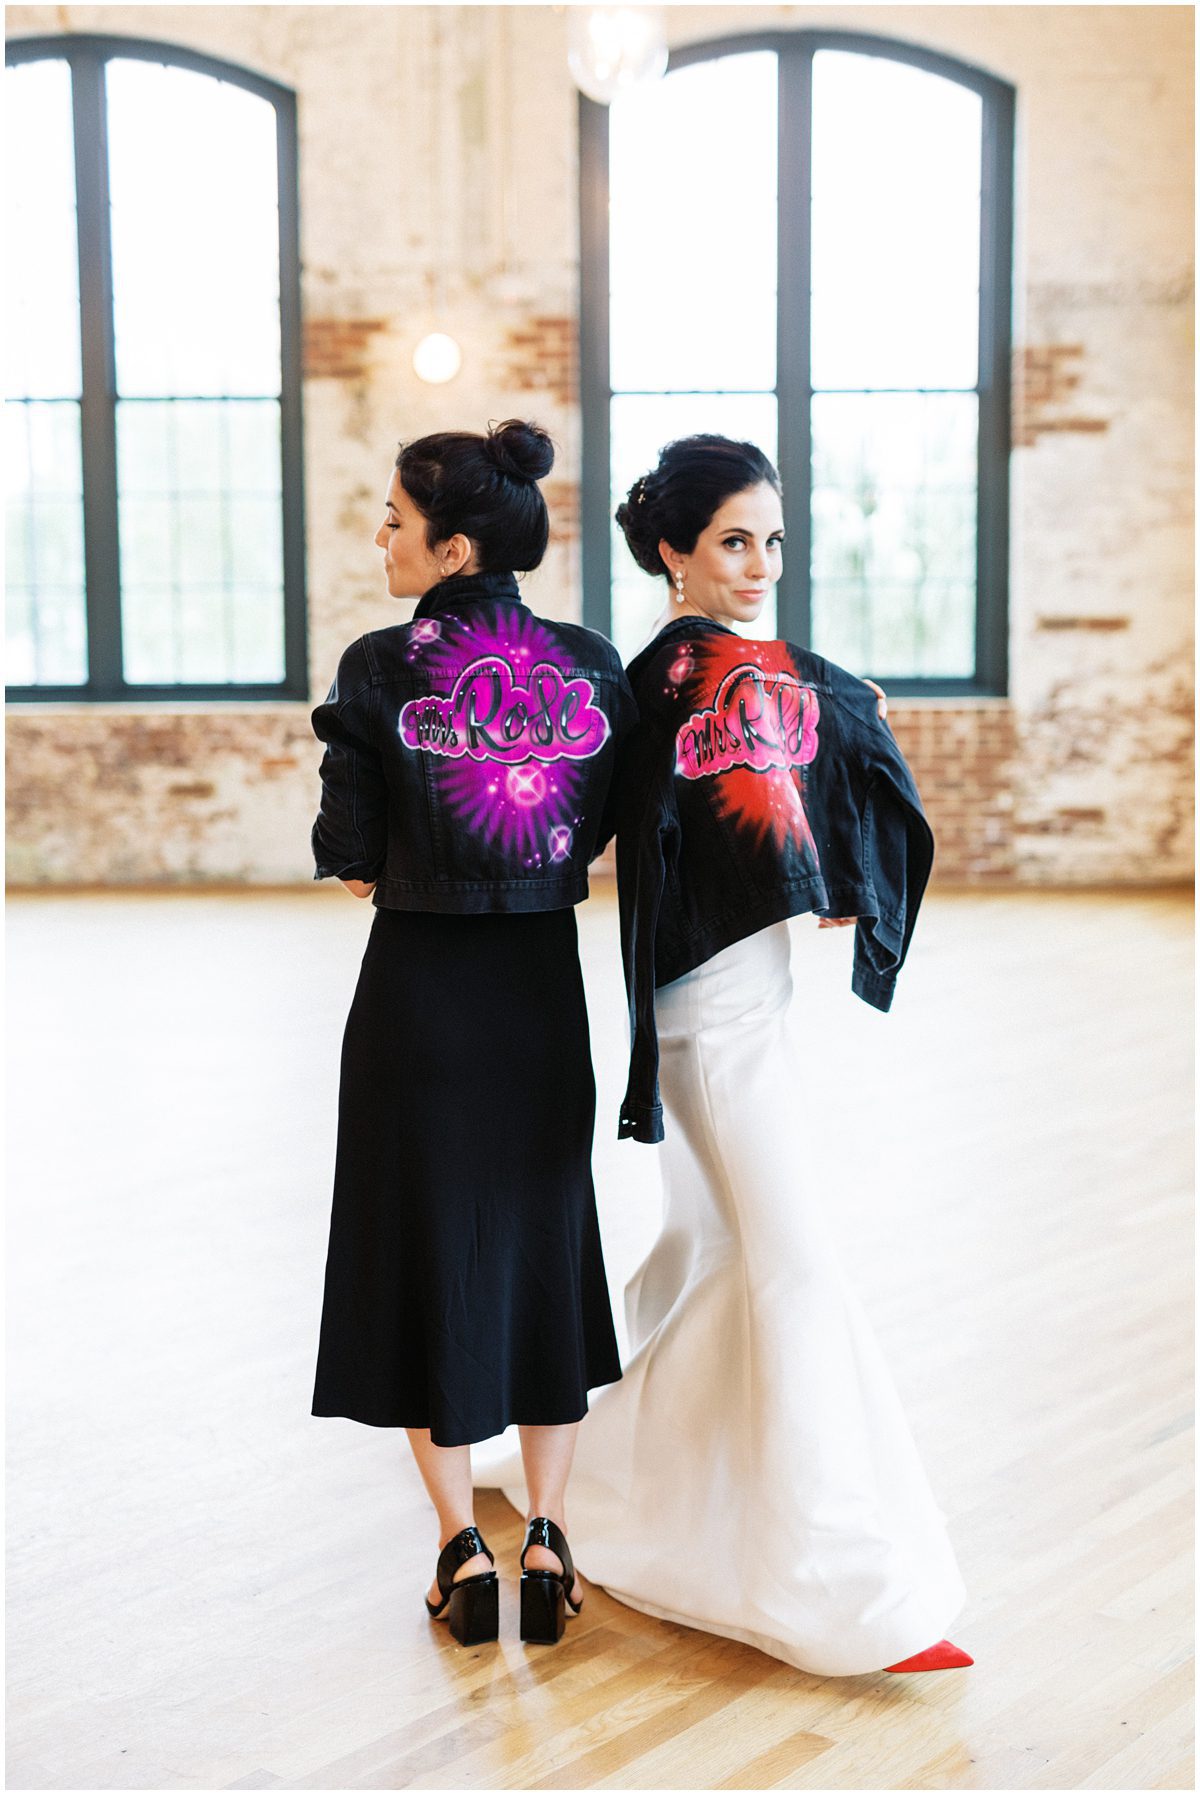 NYC bride and her sister wearing custom spray paint jackets with their last names